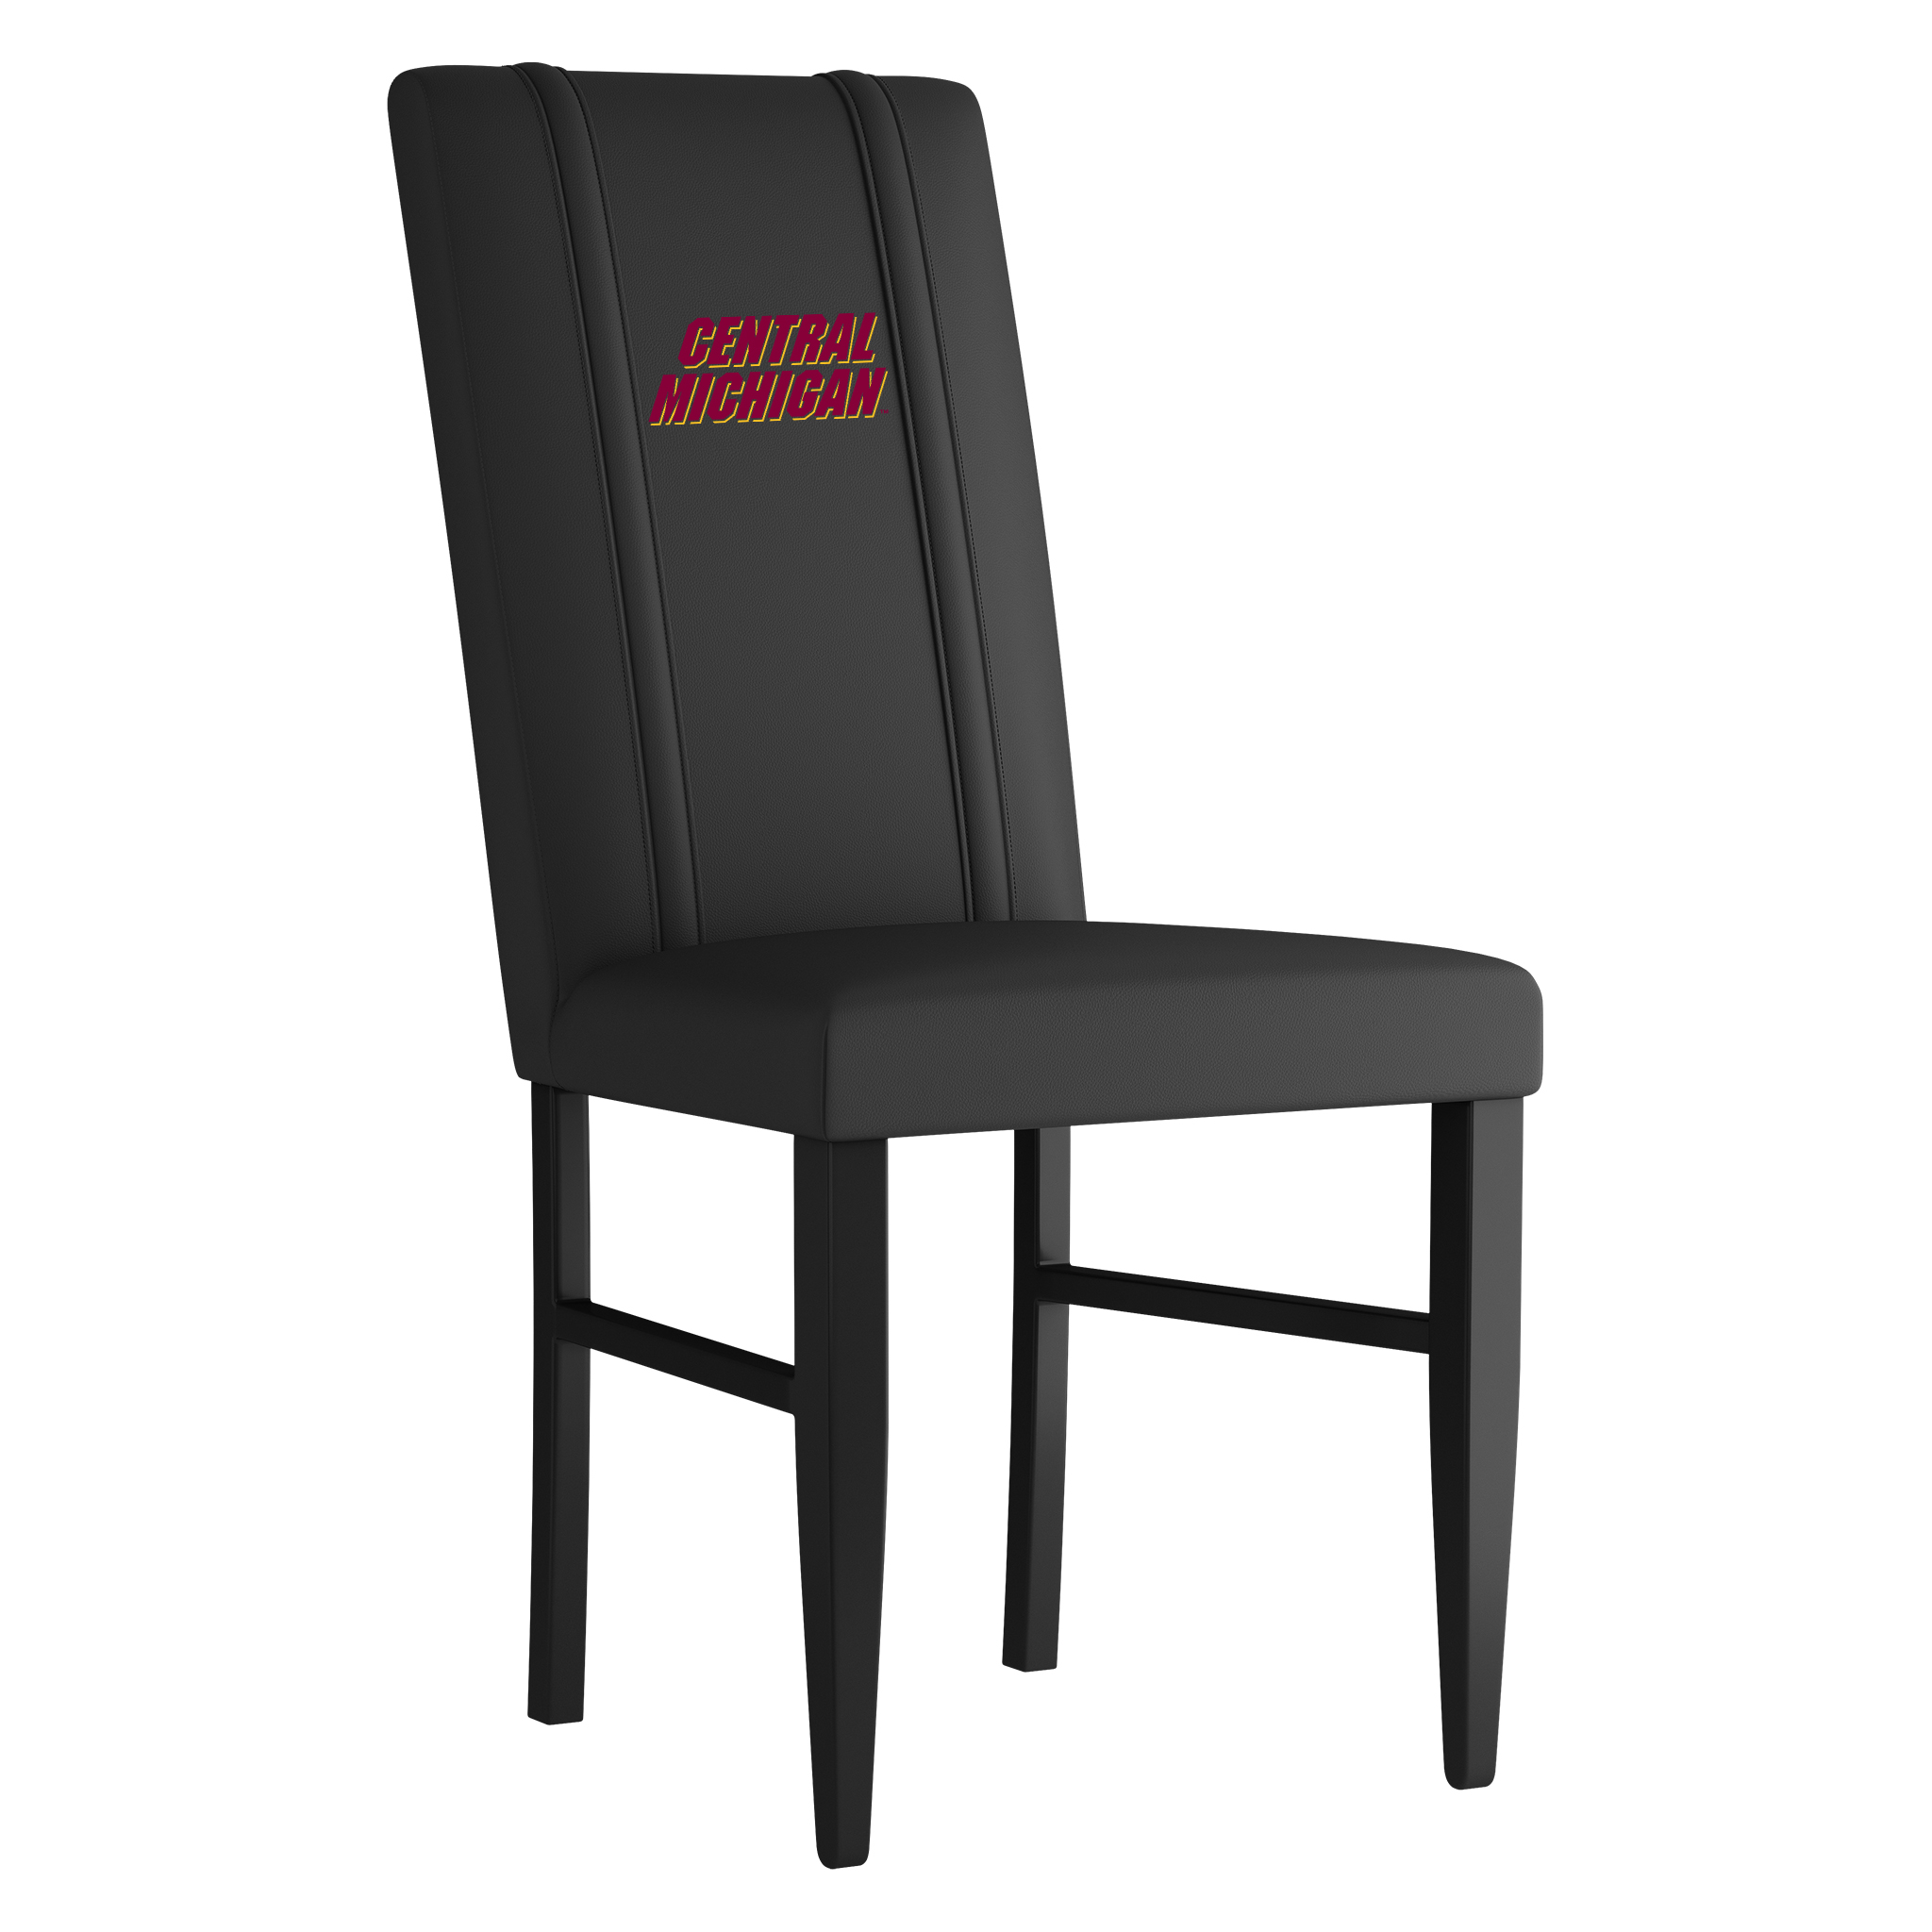 Central Michigan Side Chair 2000 With Central Michigan Secondary